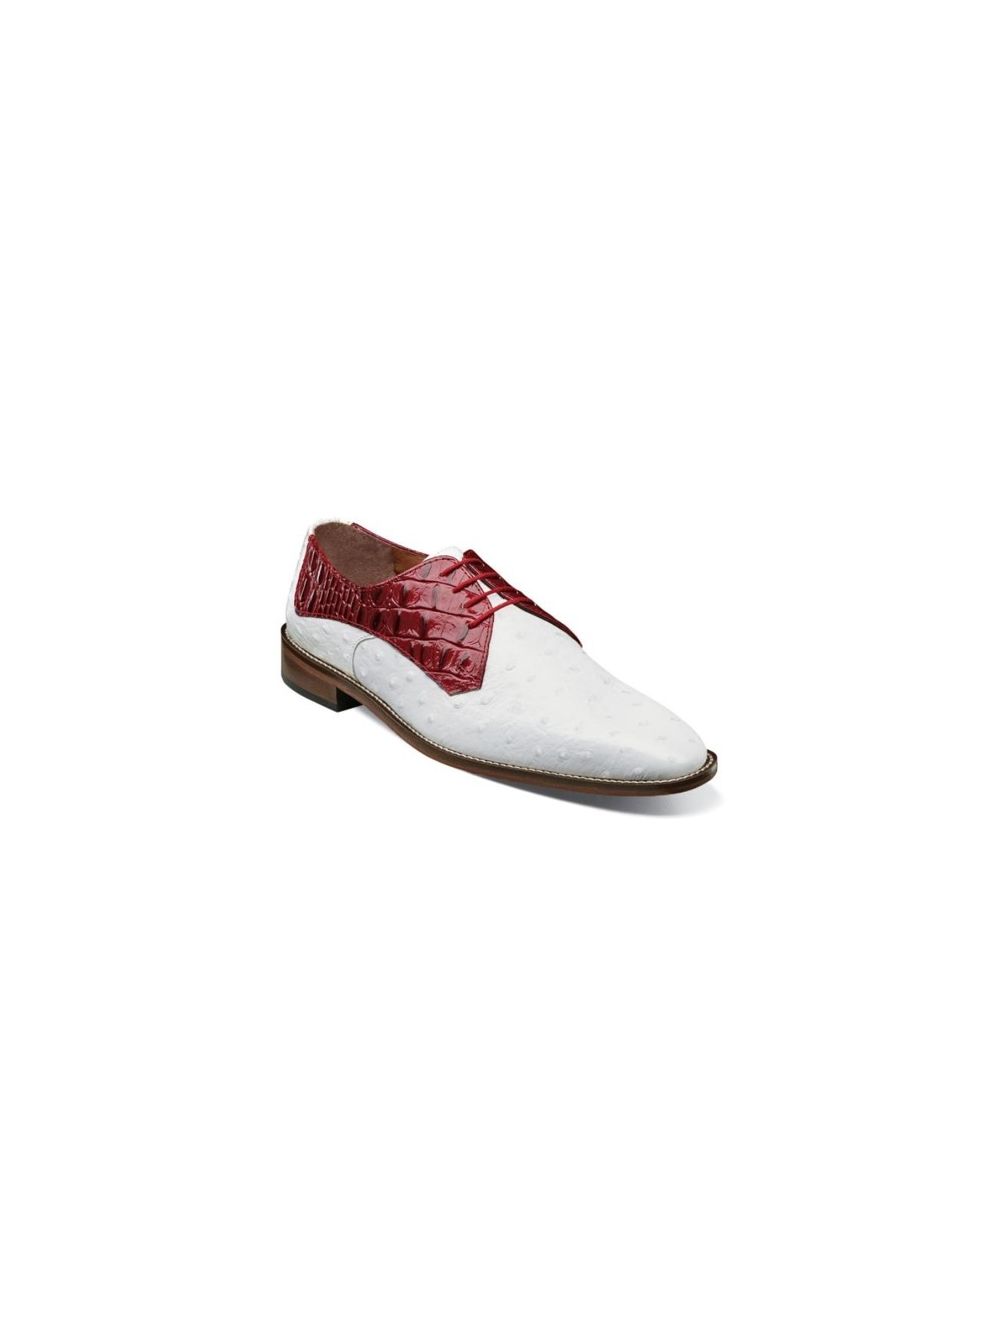 red and white stacy adams shoes